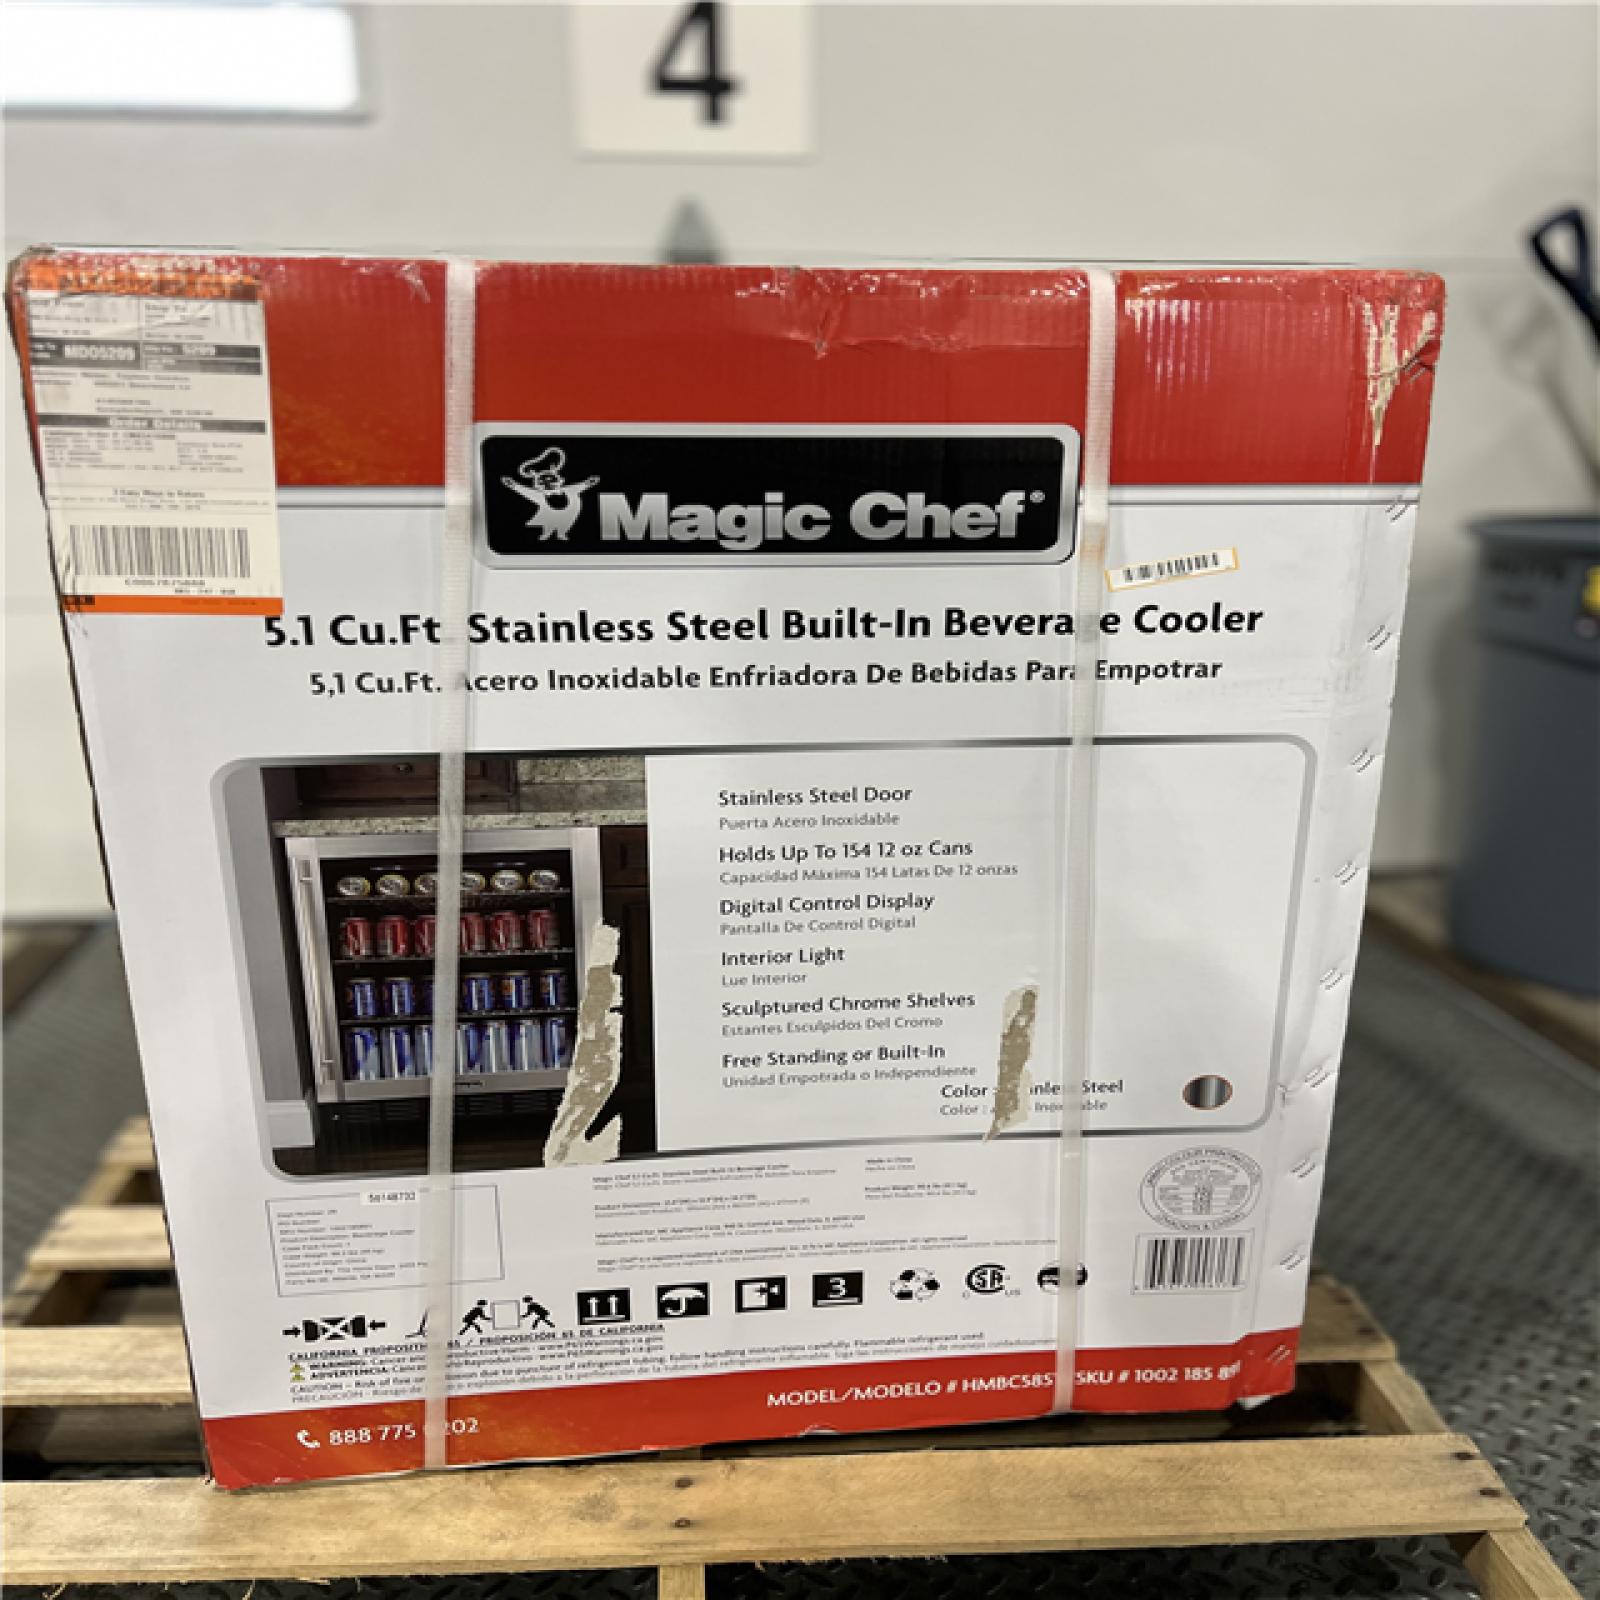 DALLAS LOCATION- AS-IS - Magic Chef Beverage 23.4 in. 154 (12 oz.) Can Beverage Cooler, Stainless Steel